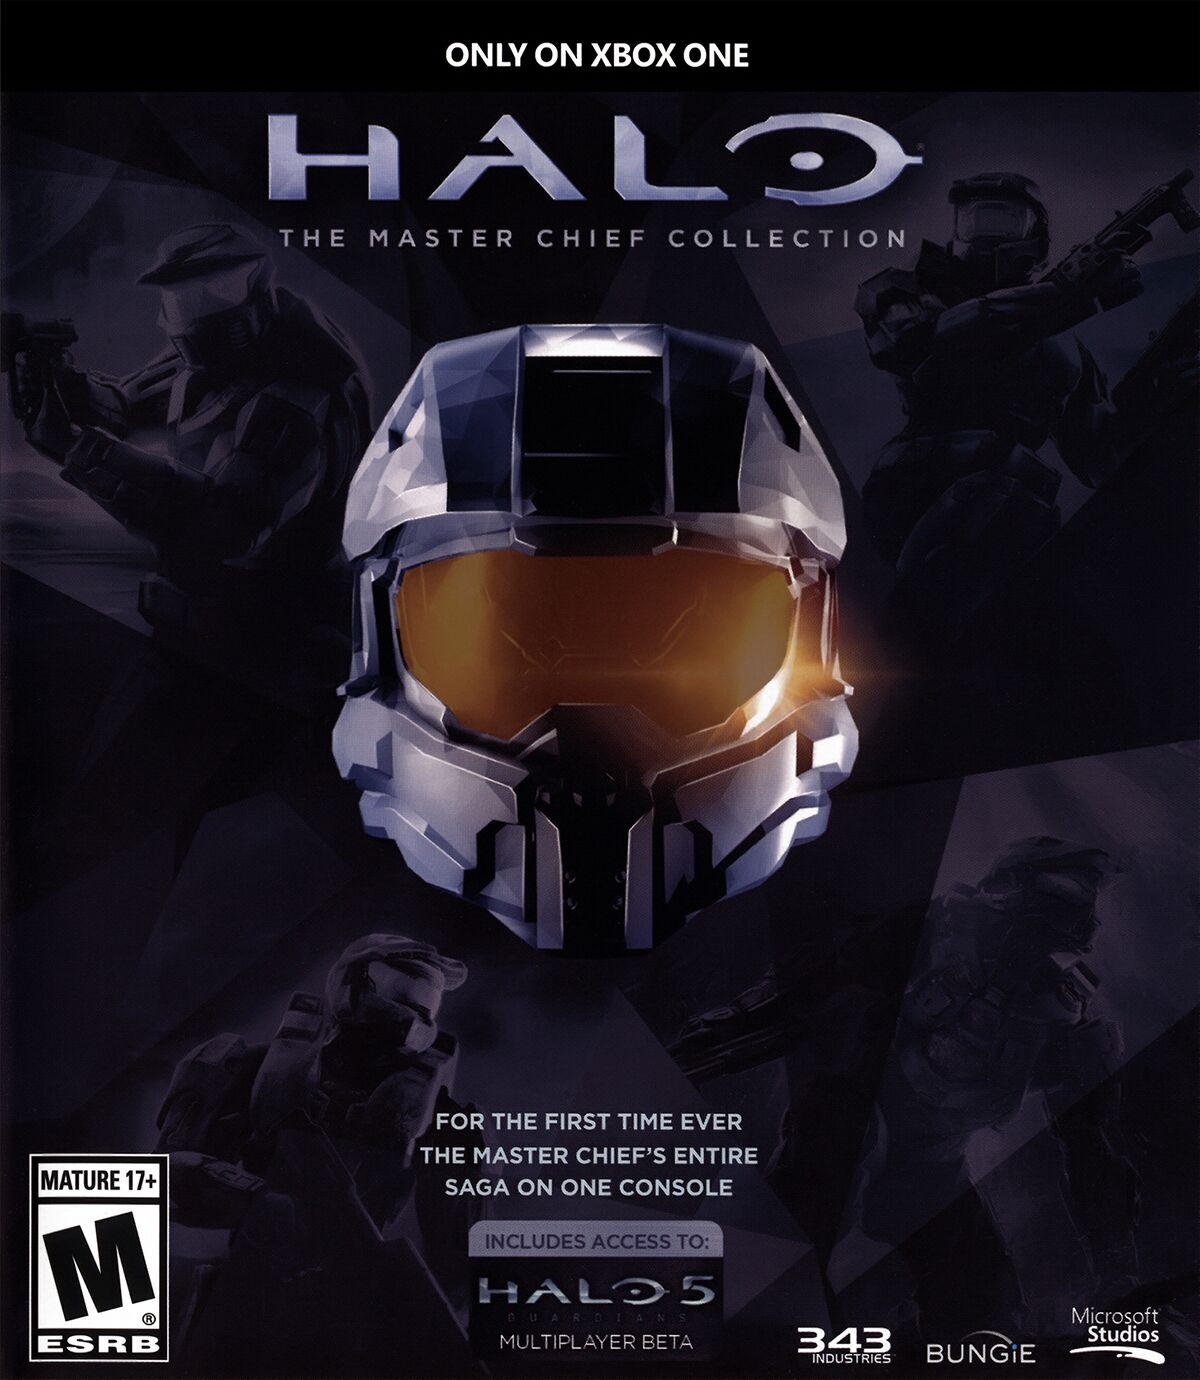 file-halo-the-master-chief-collection-na-xbox-one-box-jpg-strategywiki-the-video-game